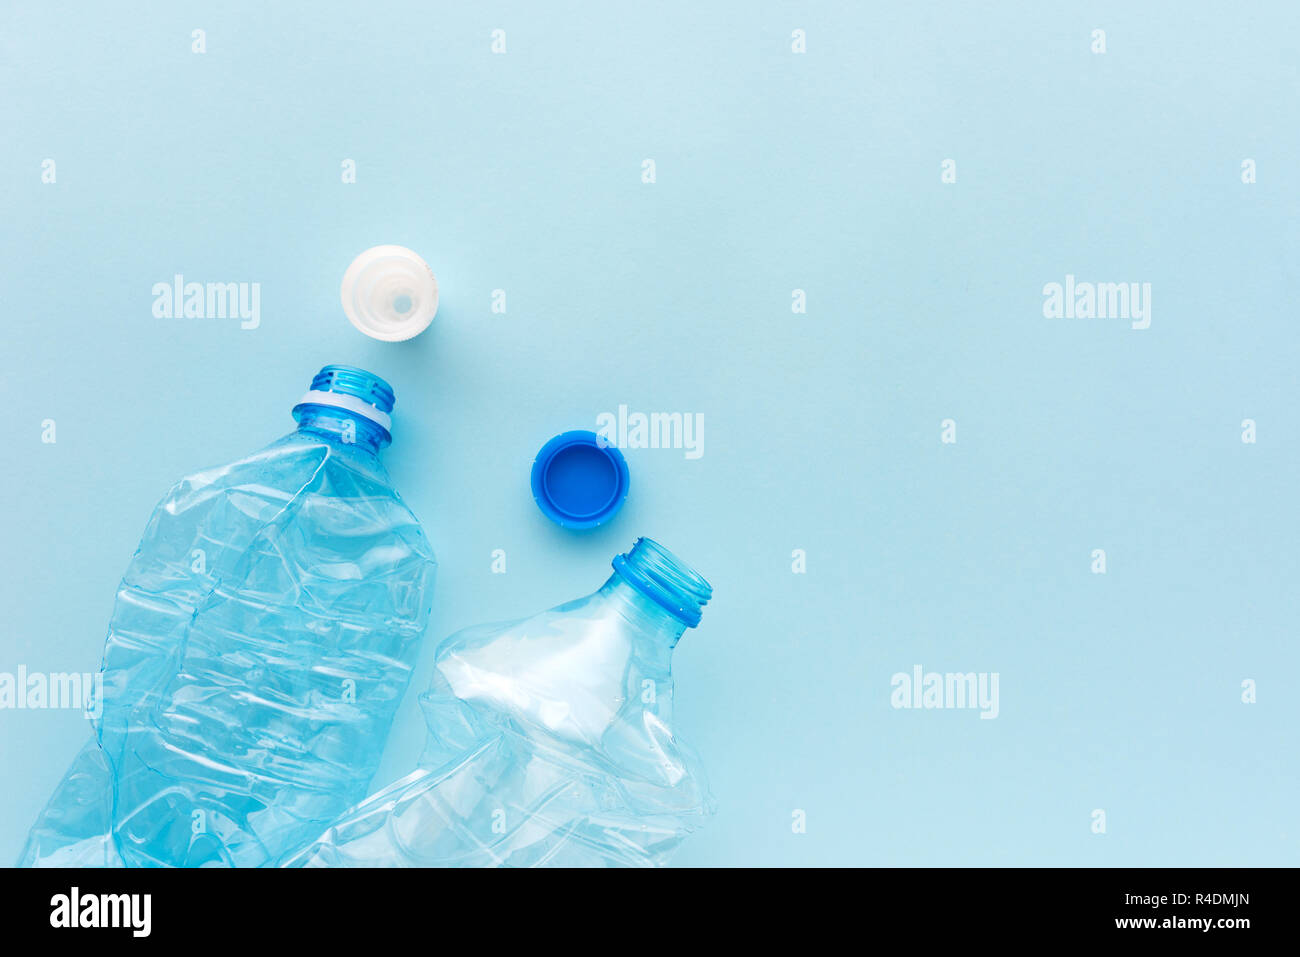 Used plastic bottles for recycling, conceptual image with copy space Stock Photo